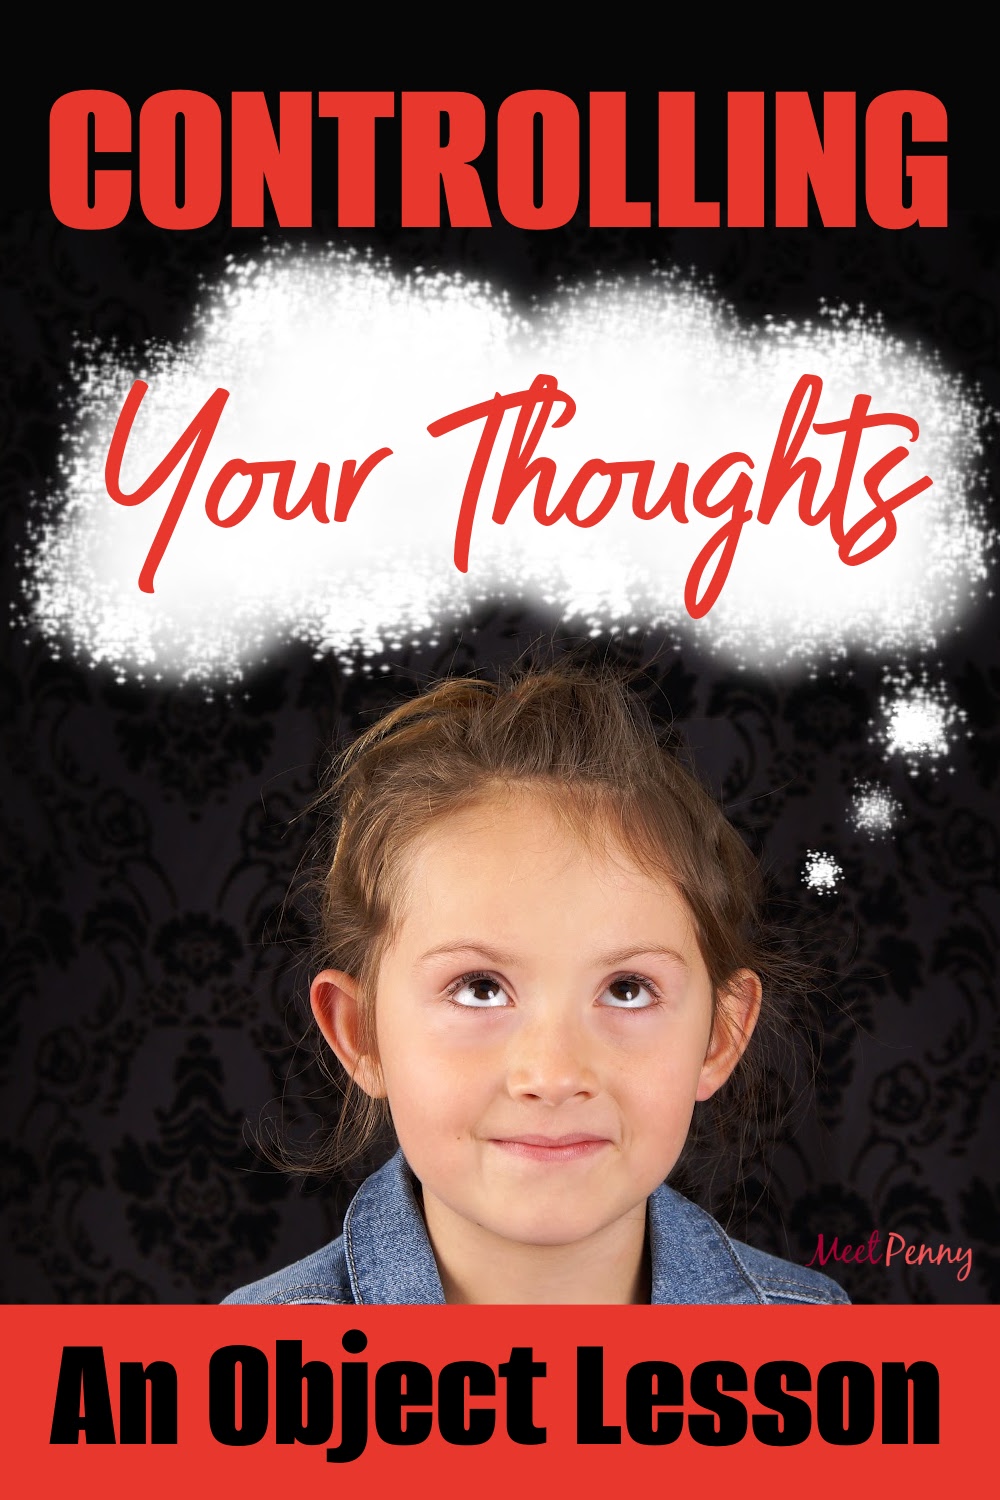 Object lesson for kids: This Bible lesson on renewing the mind is a powerful way to make such an abstract concept a concrete example of taking our thoughts captive.